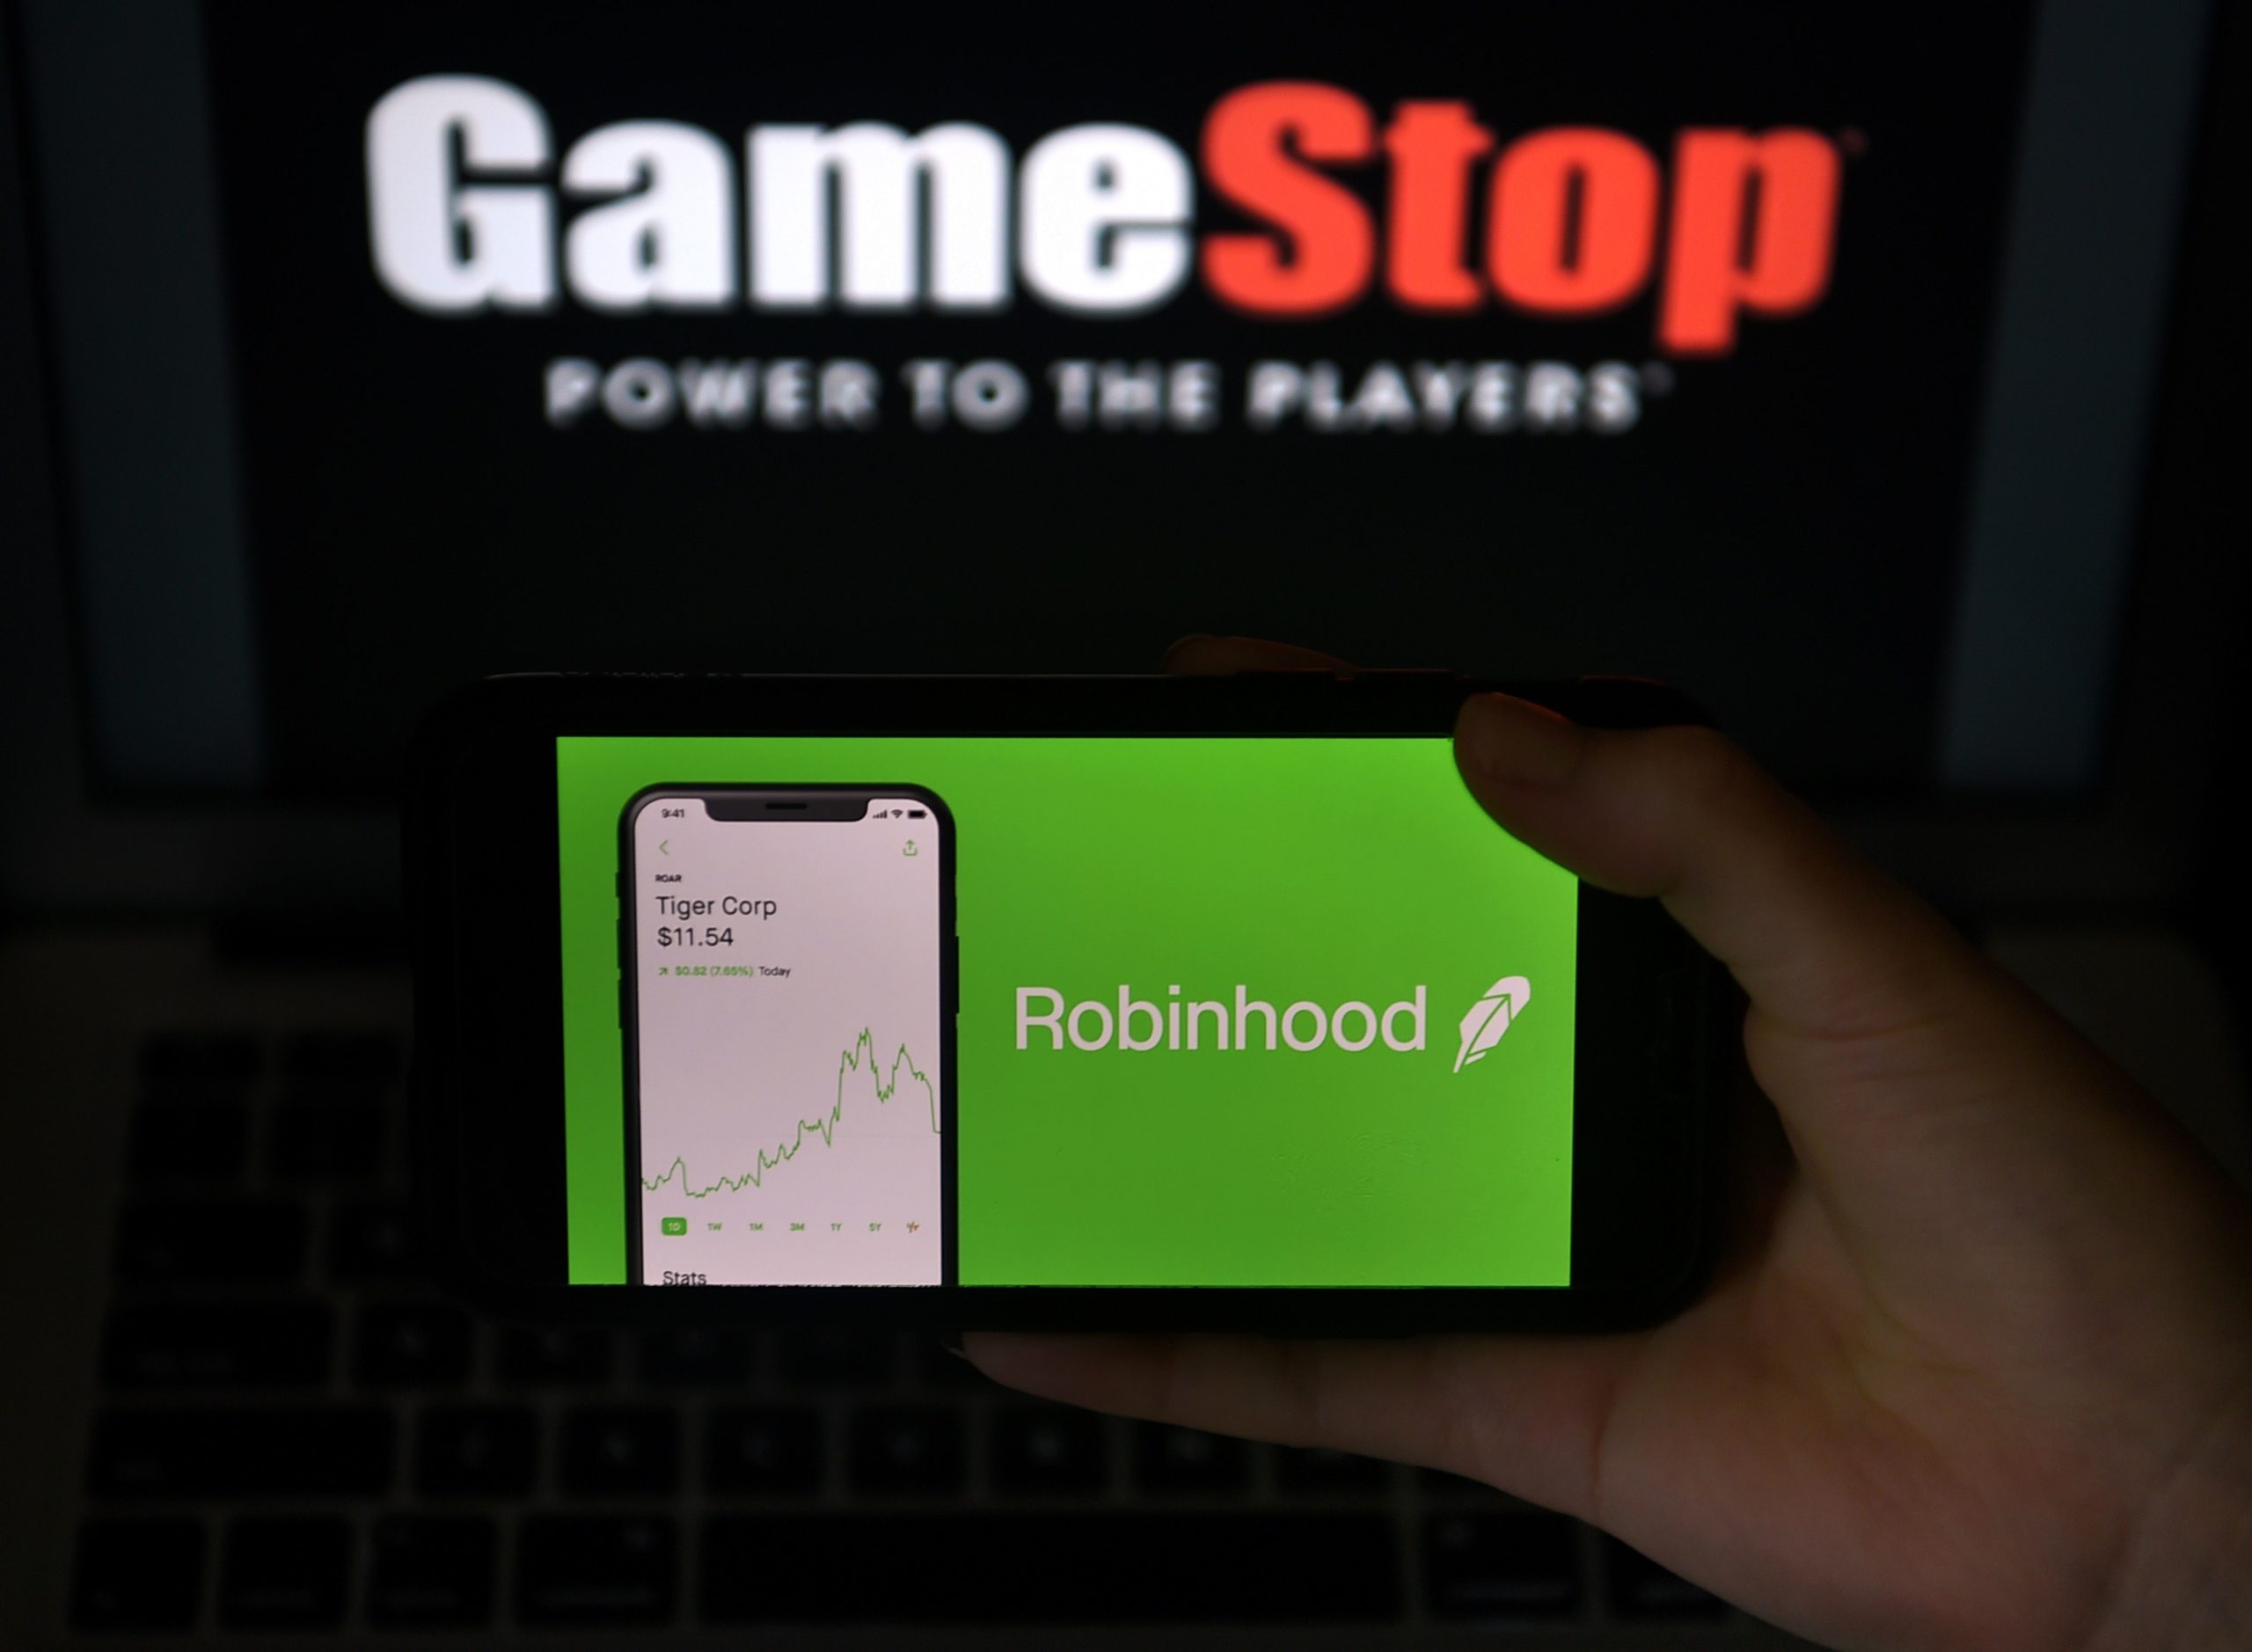 An illustration of GameStop and Robinhood logos are pictured in Arlington, Virginia on Jan. 28. (Olivier Douliery/AFP via Getty Images)